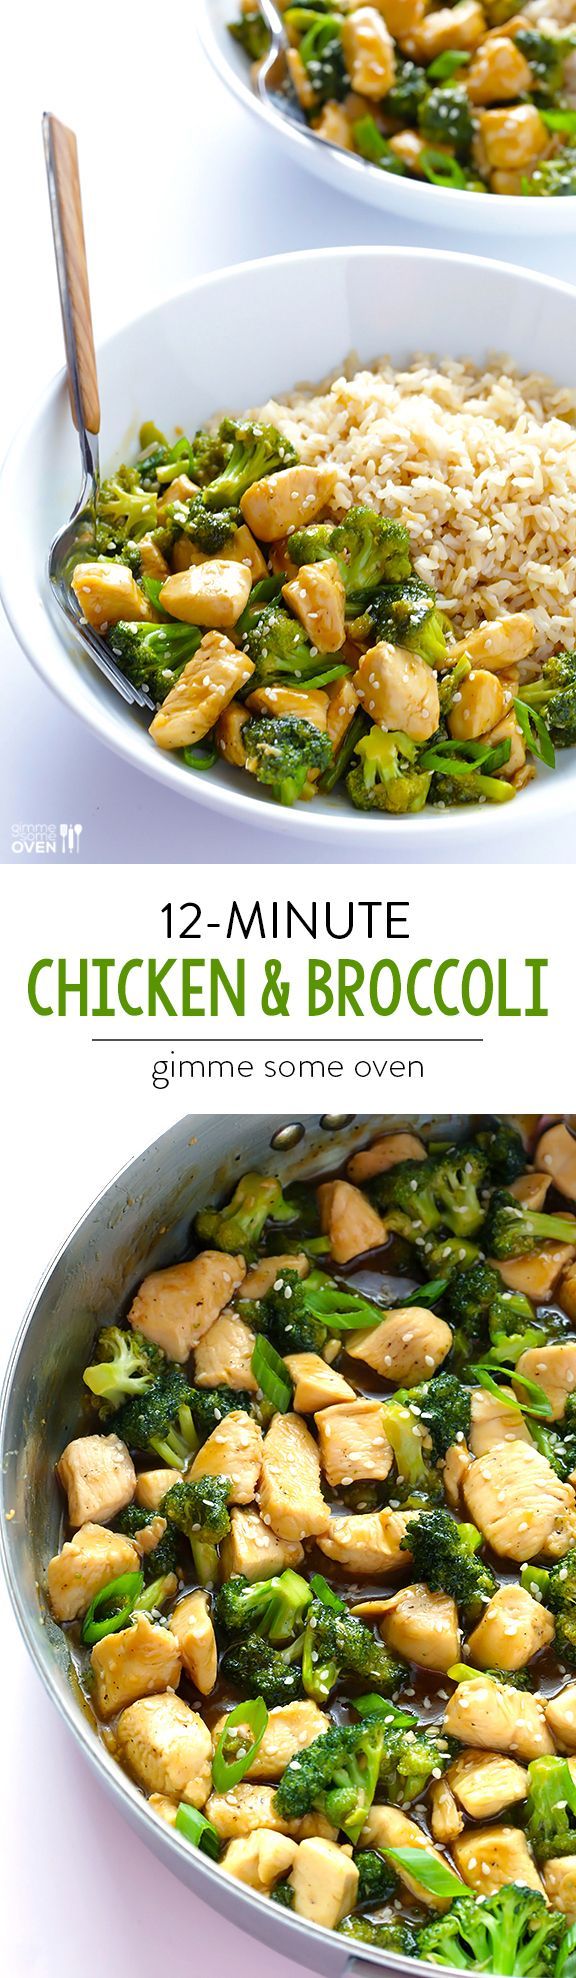 12-Minute Chicken & Broccoli — quick and easy to prepare, and perfect when served over rice or quinoa or just plain!